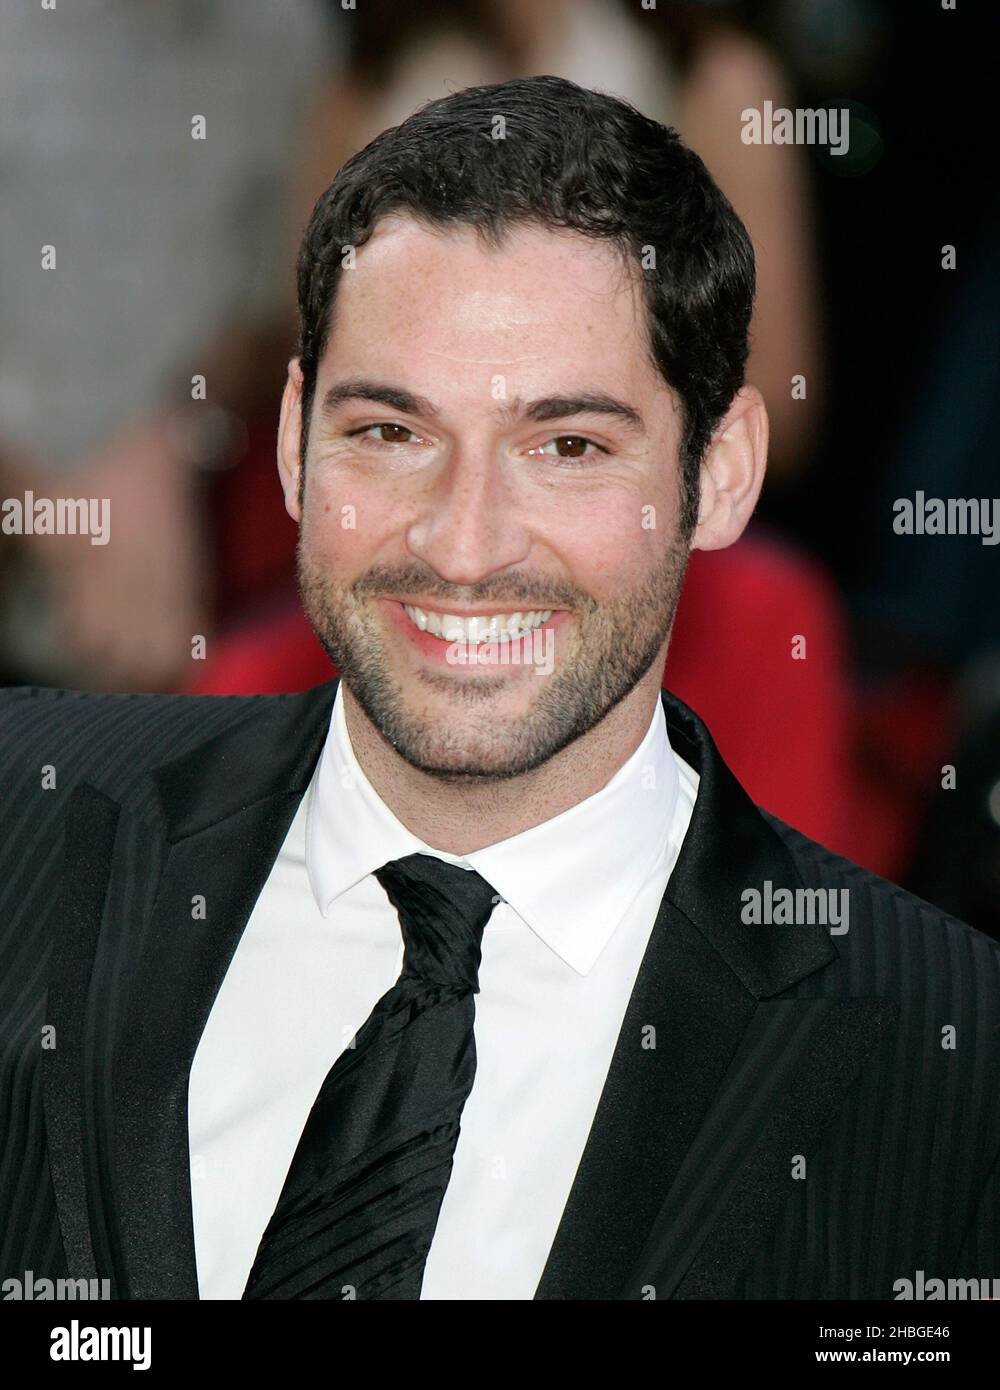 Tom Ellis arrives at the Phillips British Television Academy Awards at the Grosvenor House Hotel on May 22, 2011. Stock Photo